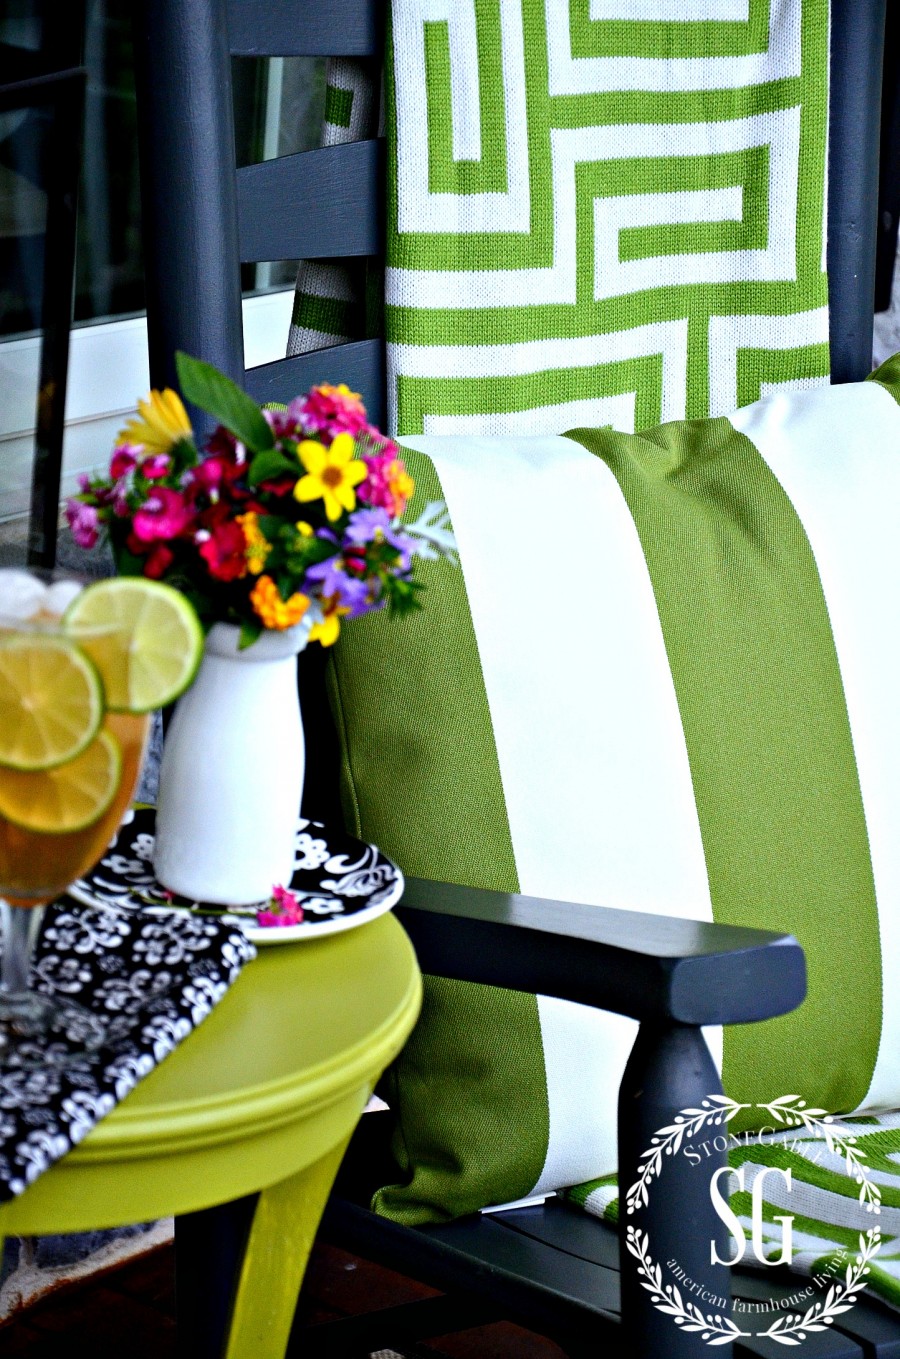 6 ESSENTIALS FOR CREATING AN OUTDOOR SPACE-layering decor-stonegableblog.com